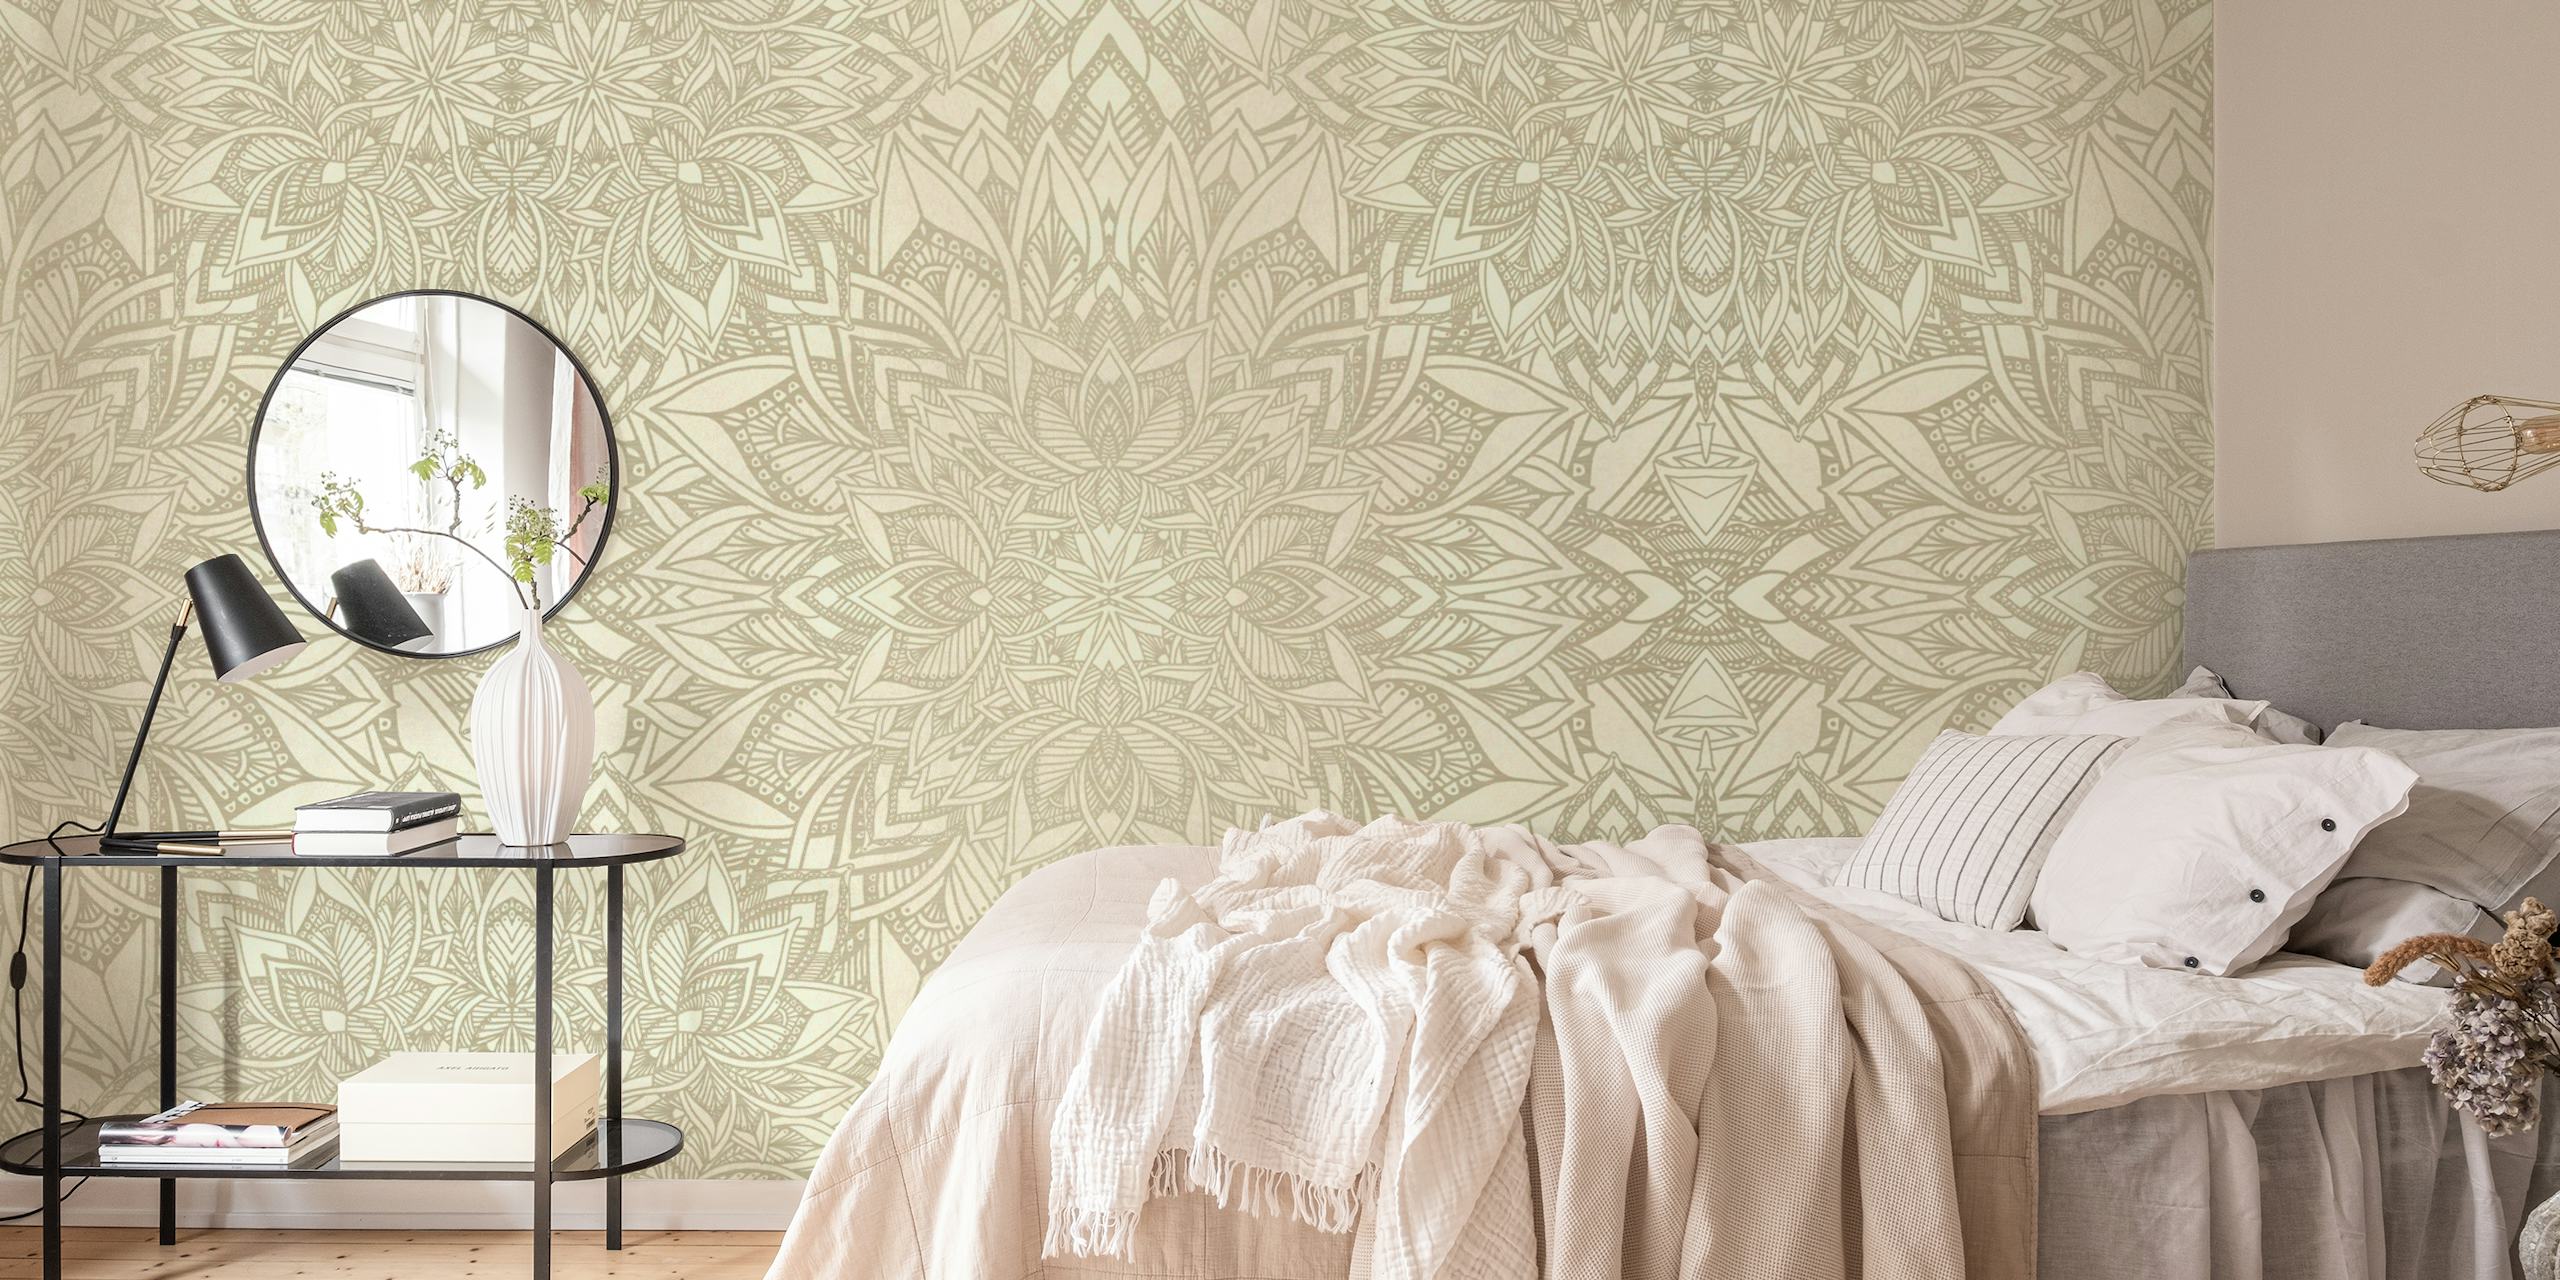 Golden Floral Mandala Wall Mural with intricate gold patterns on a neutral background